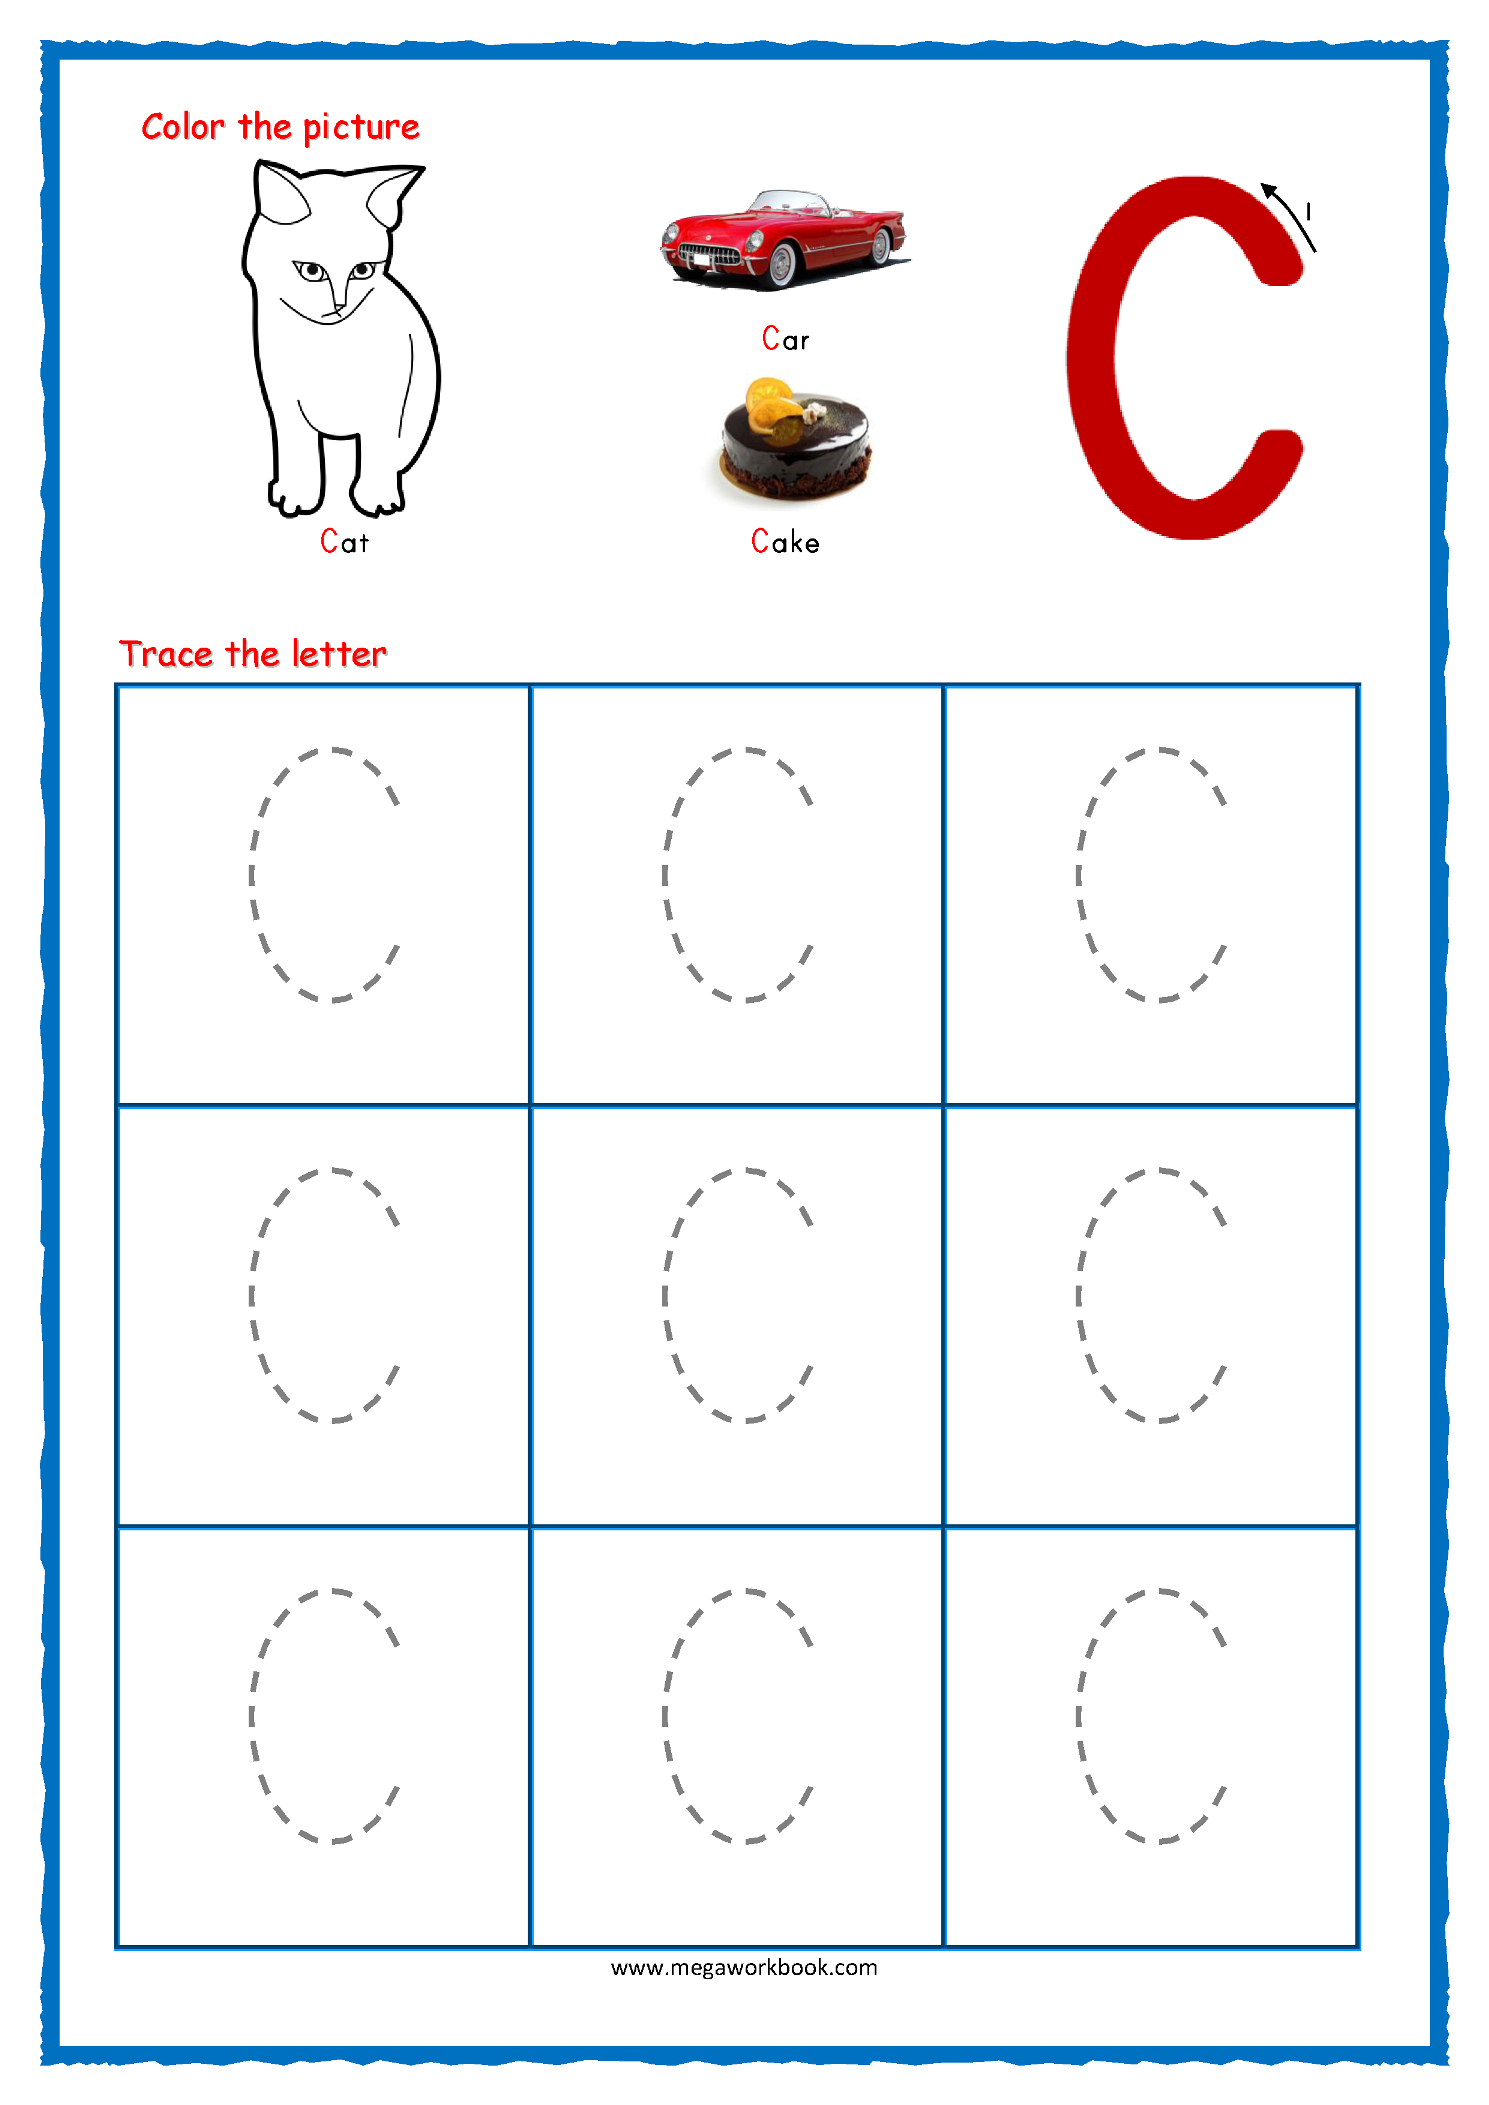 capital-letter-c-tracing-worksheet-printable-form-templates-and-letter